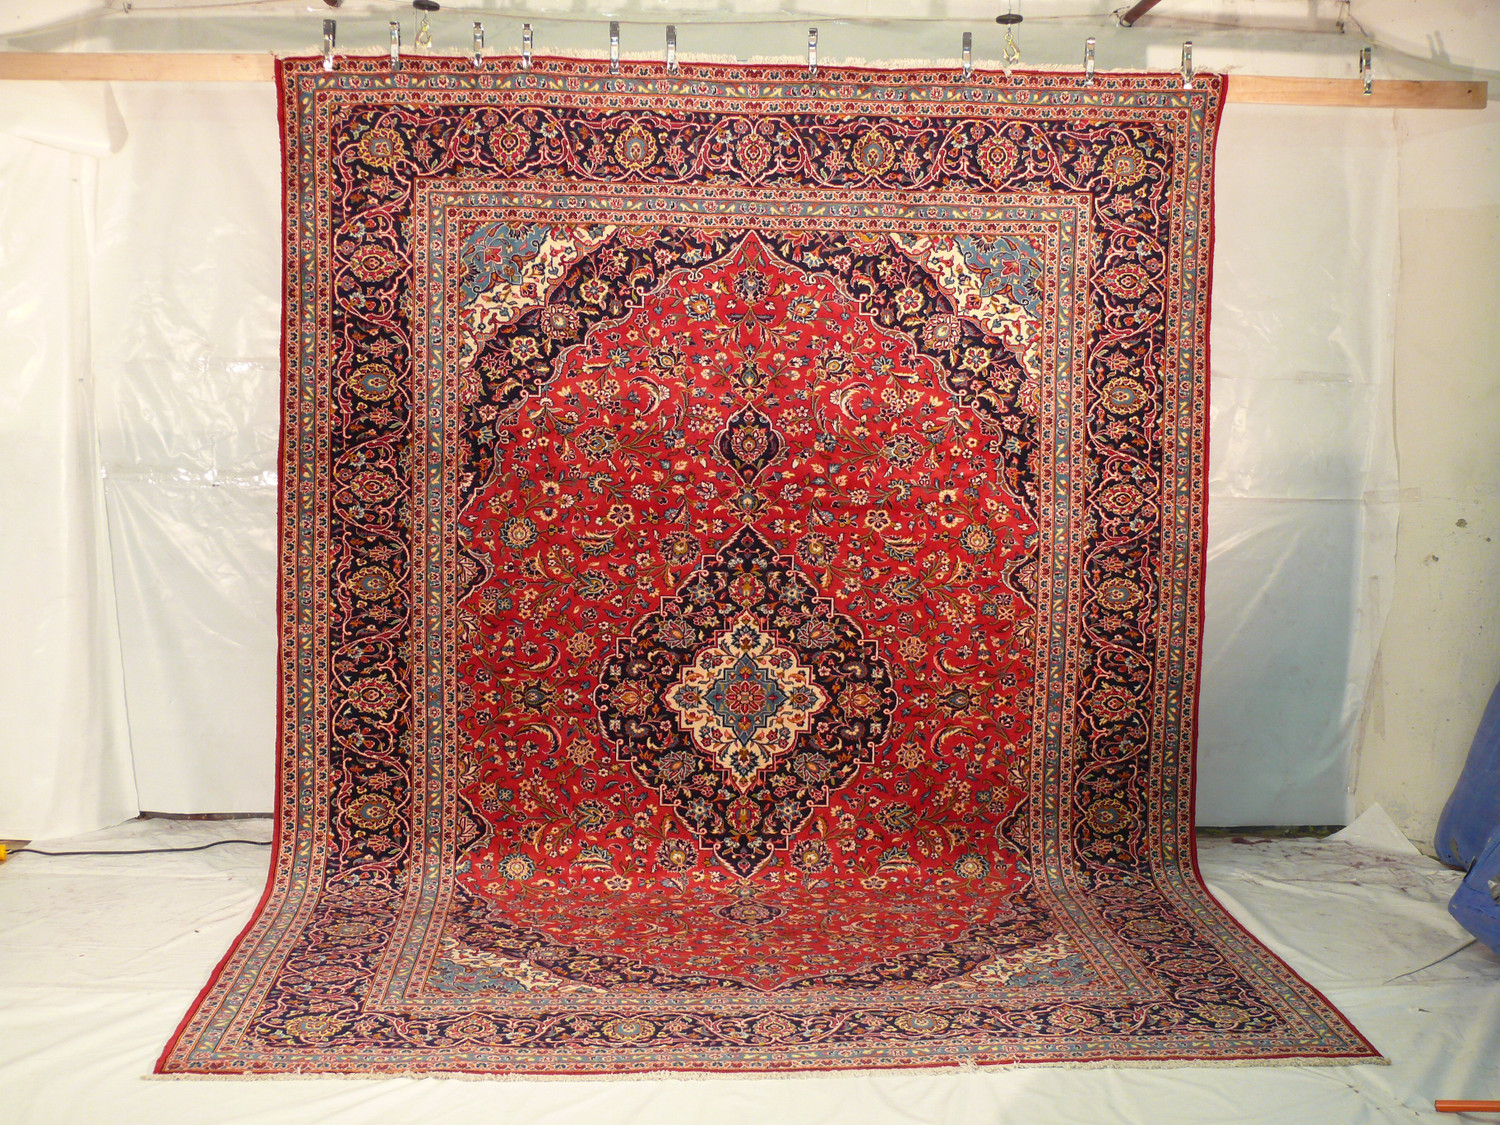 Transform any room into a luxurious retreat with our 10 x 13 Persian Kashan rug, made with high-quality wool and featured on Shark Tank